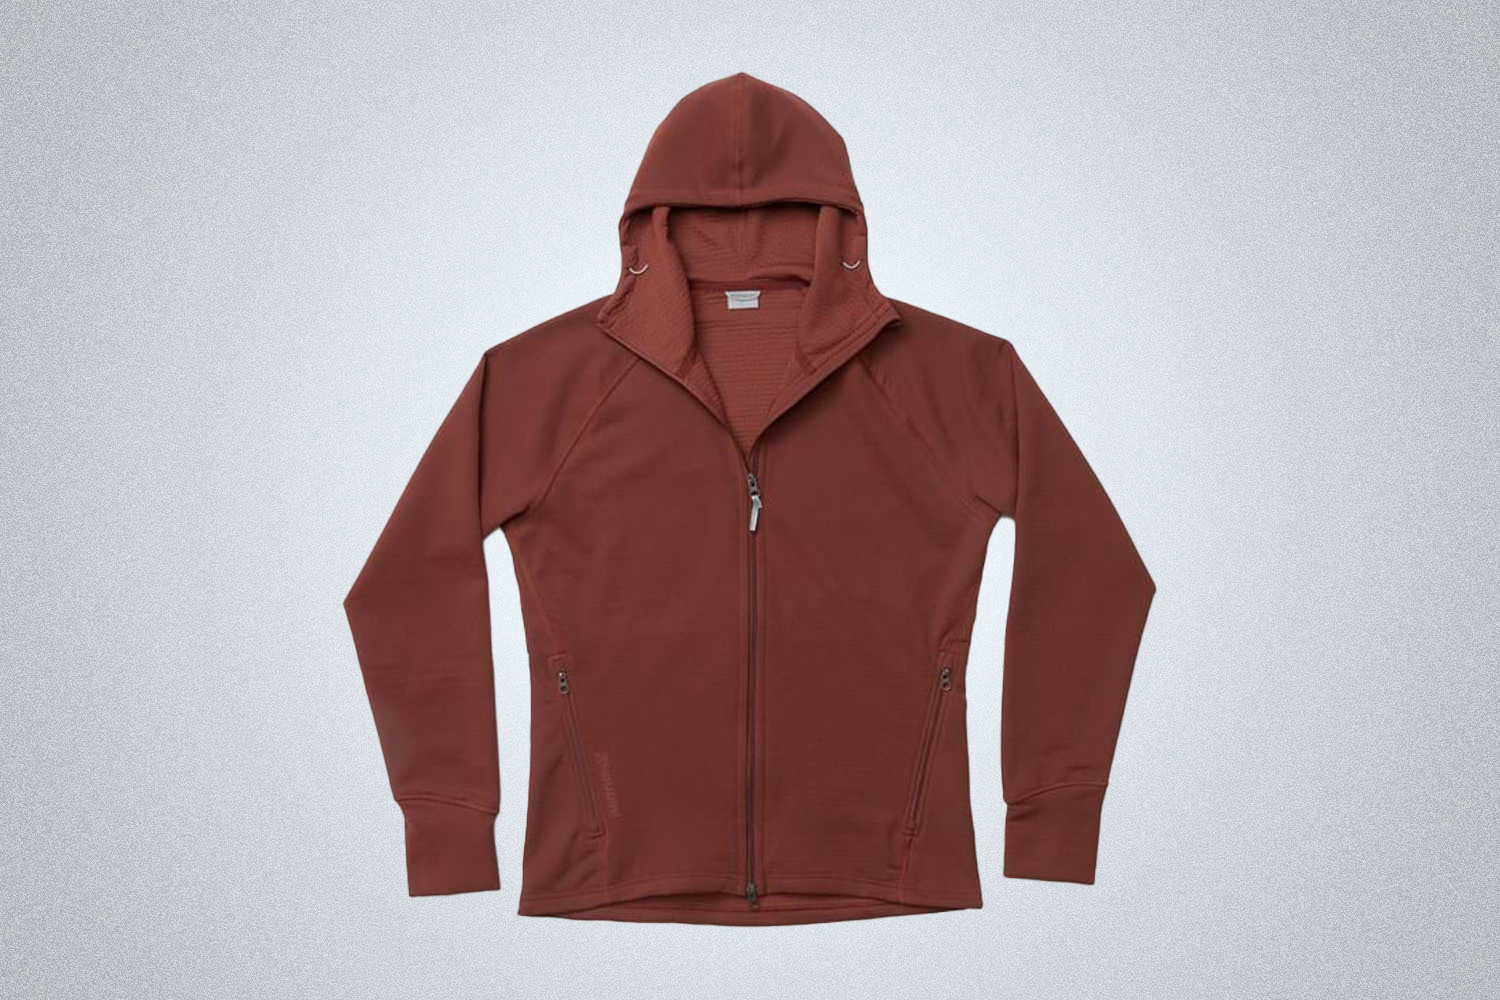 The Houdini Mono Air Houdi in red adds warmth for hiking and camping in the fall